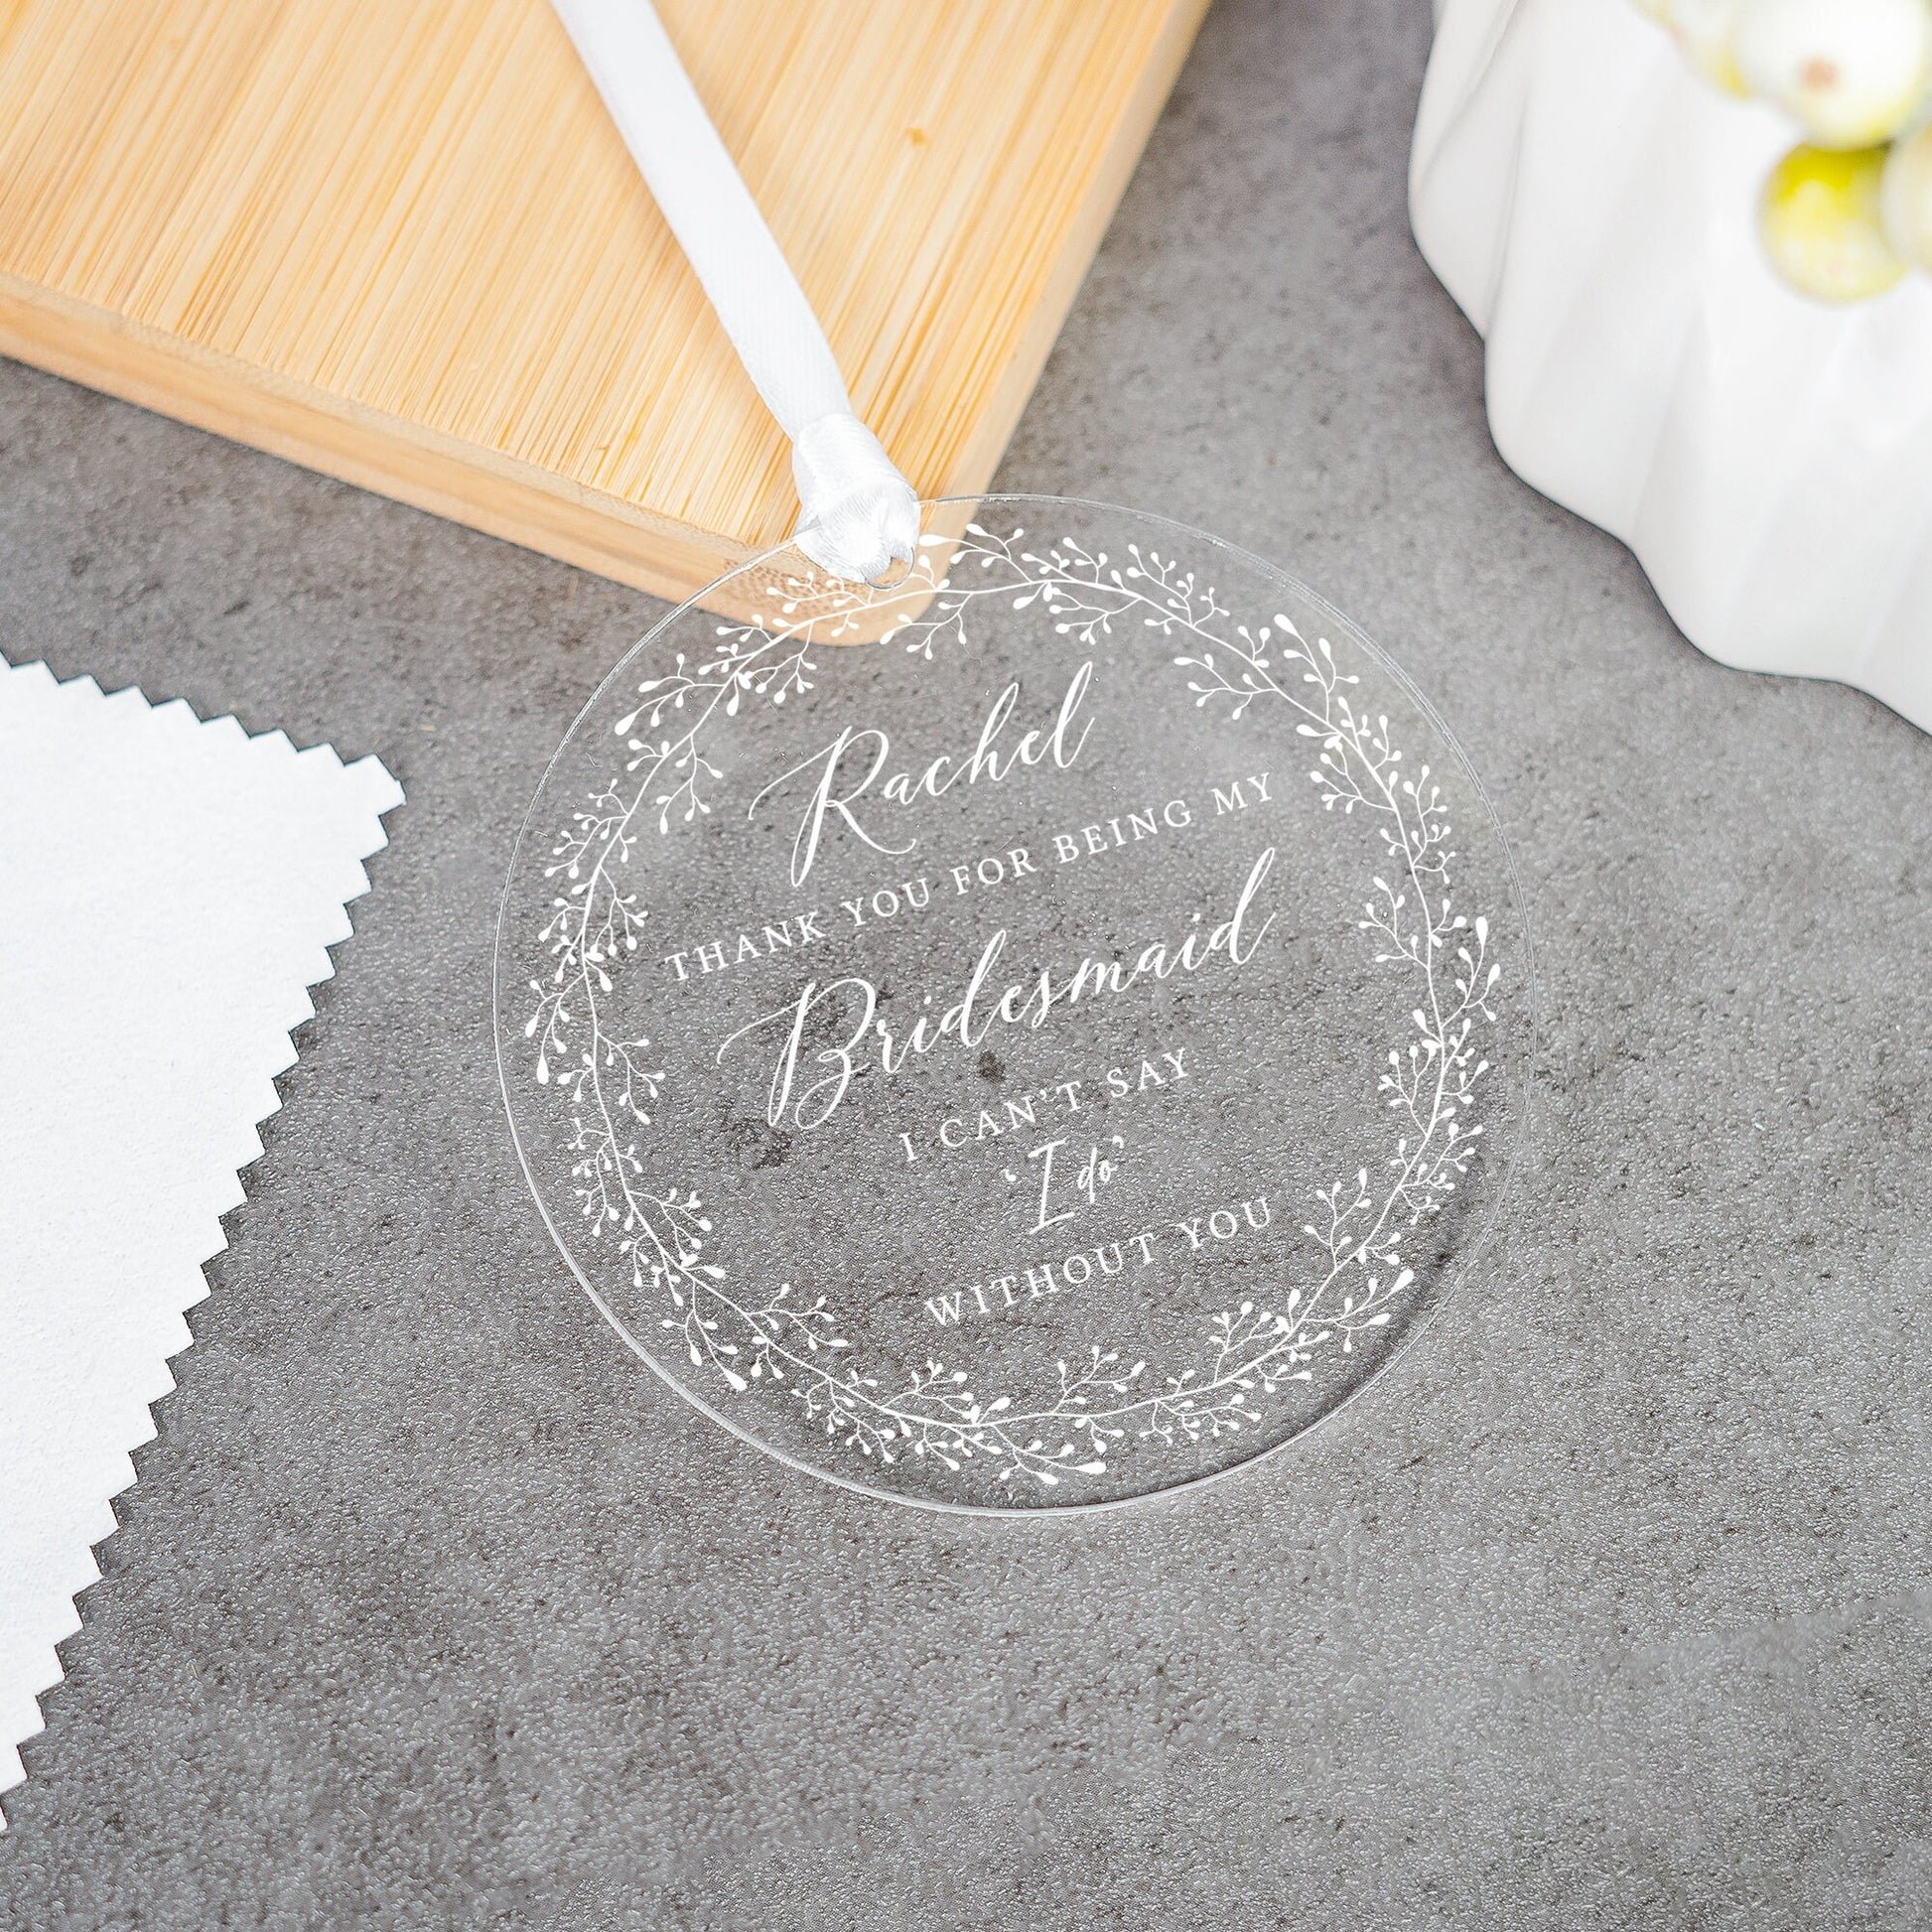 Personalised Bridesmaid Keepsake Gift, Bridesmaid Thank You Gift, Maid of Honour Gift, Wedding Role Ornament, Flower Girl Gifts, Proposals